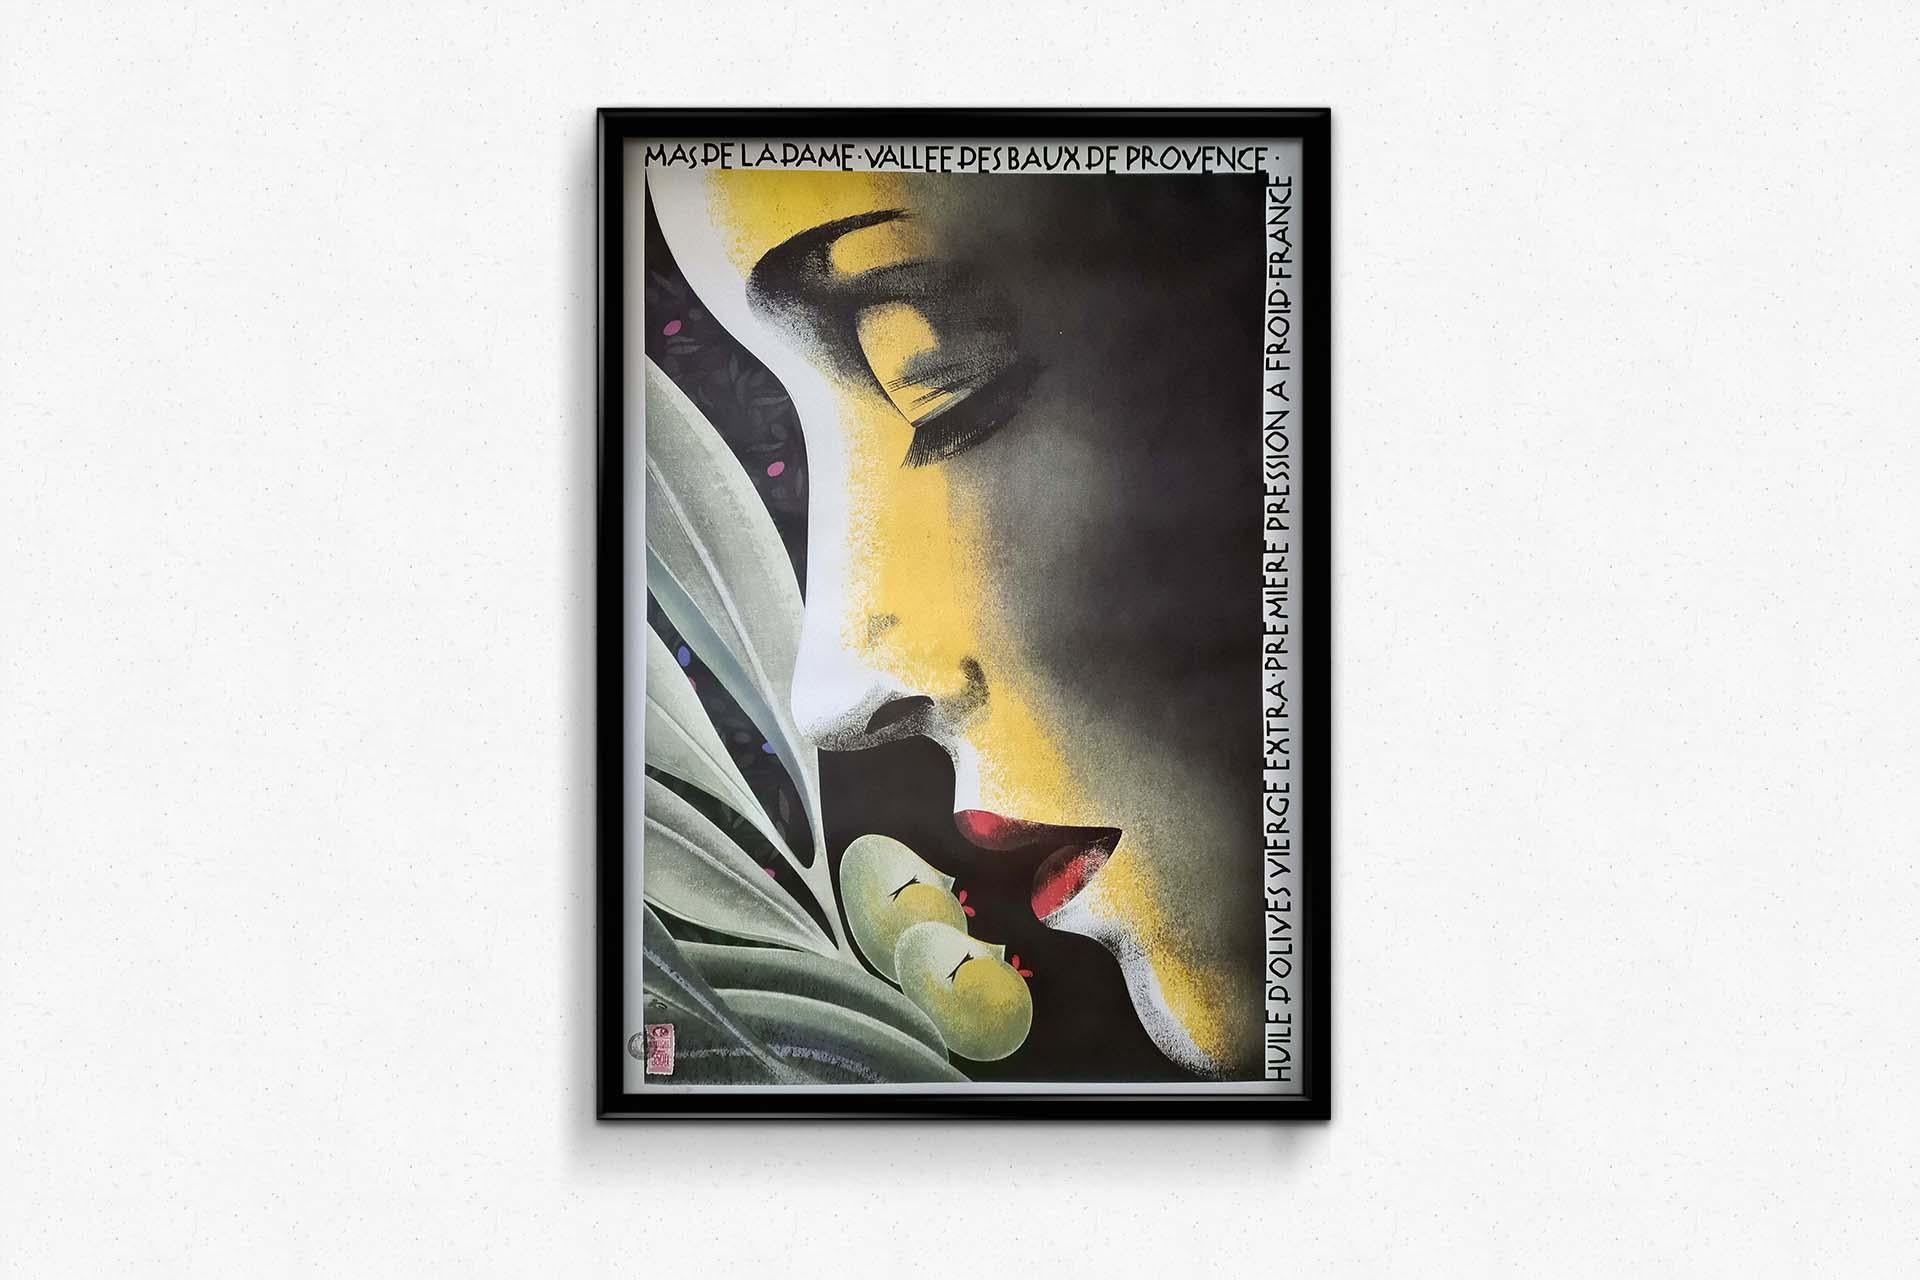 The circa 1990 original advertising poster by Philippe Sommer for 